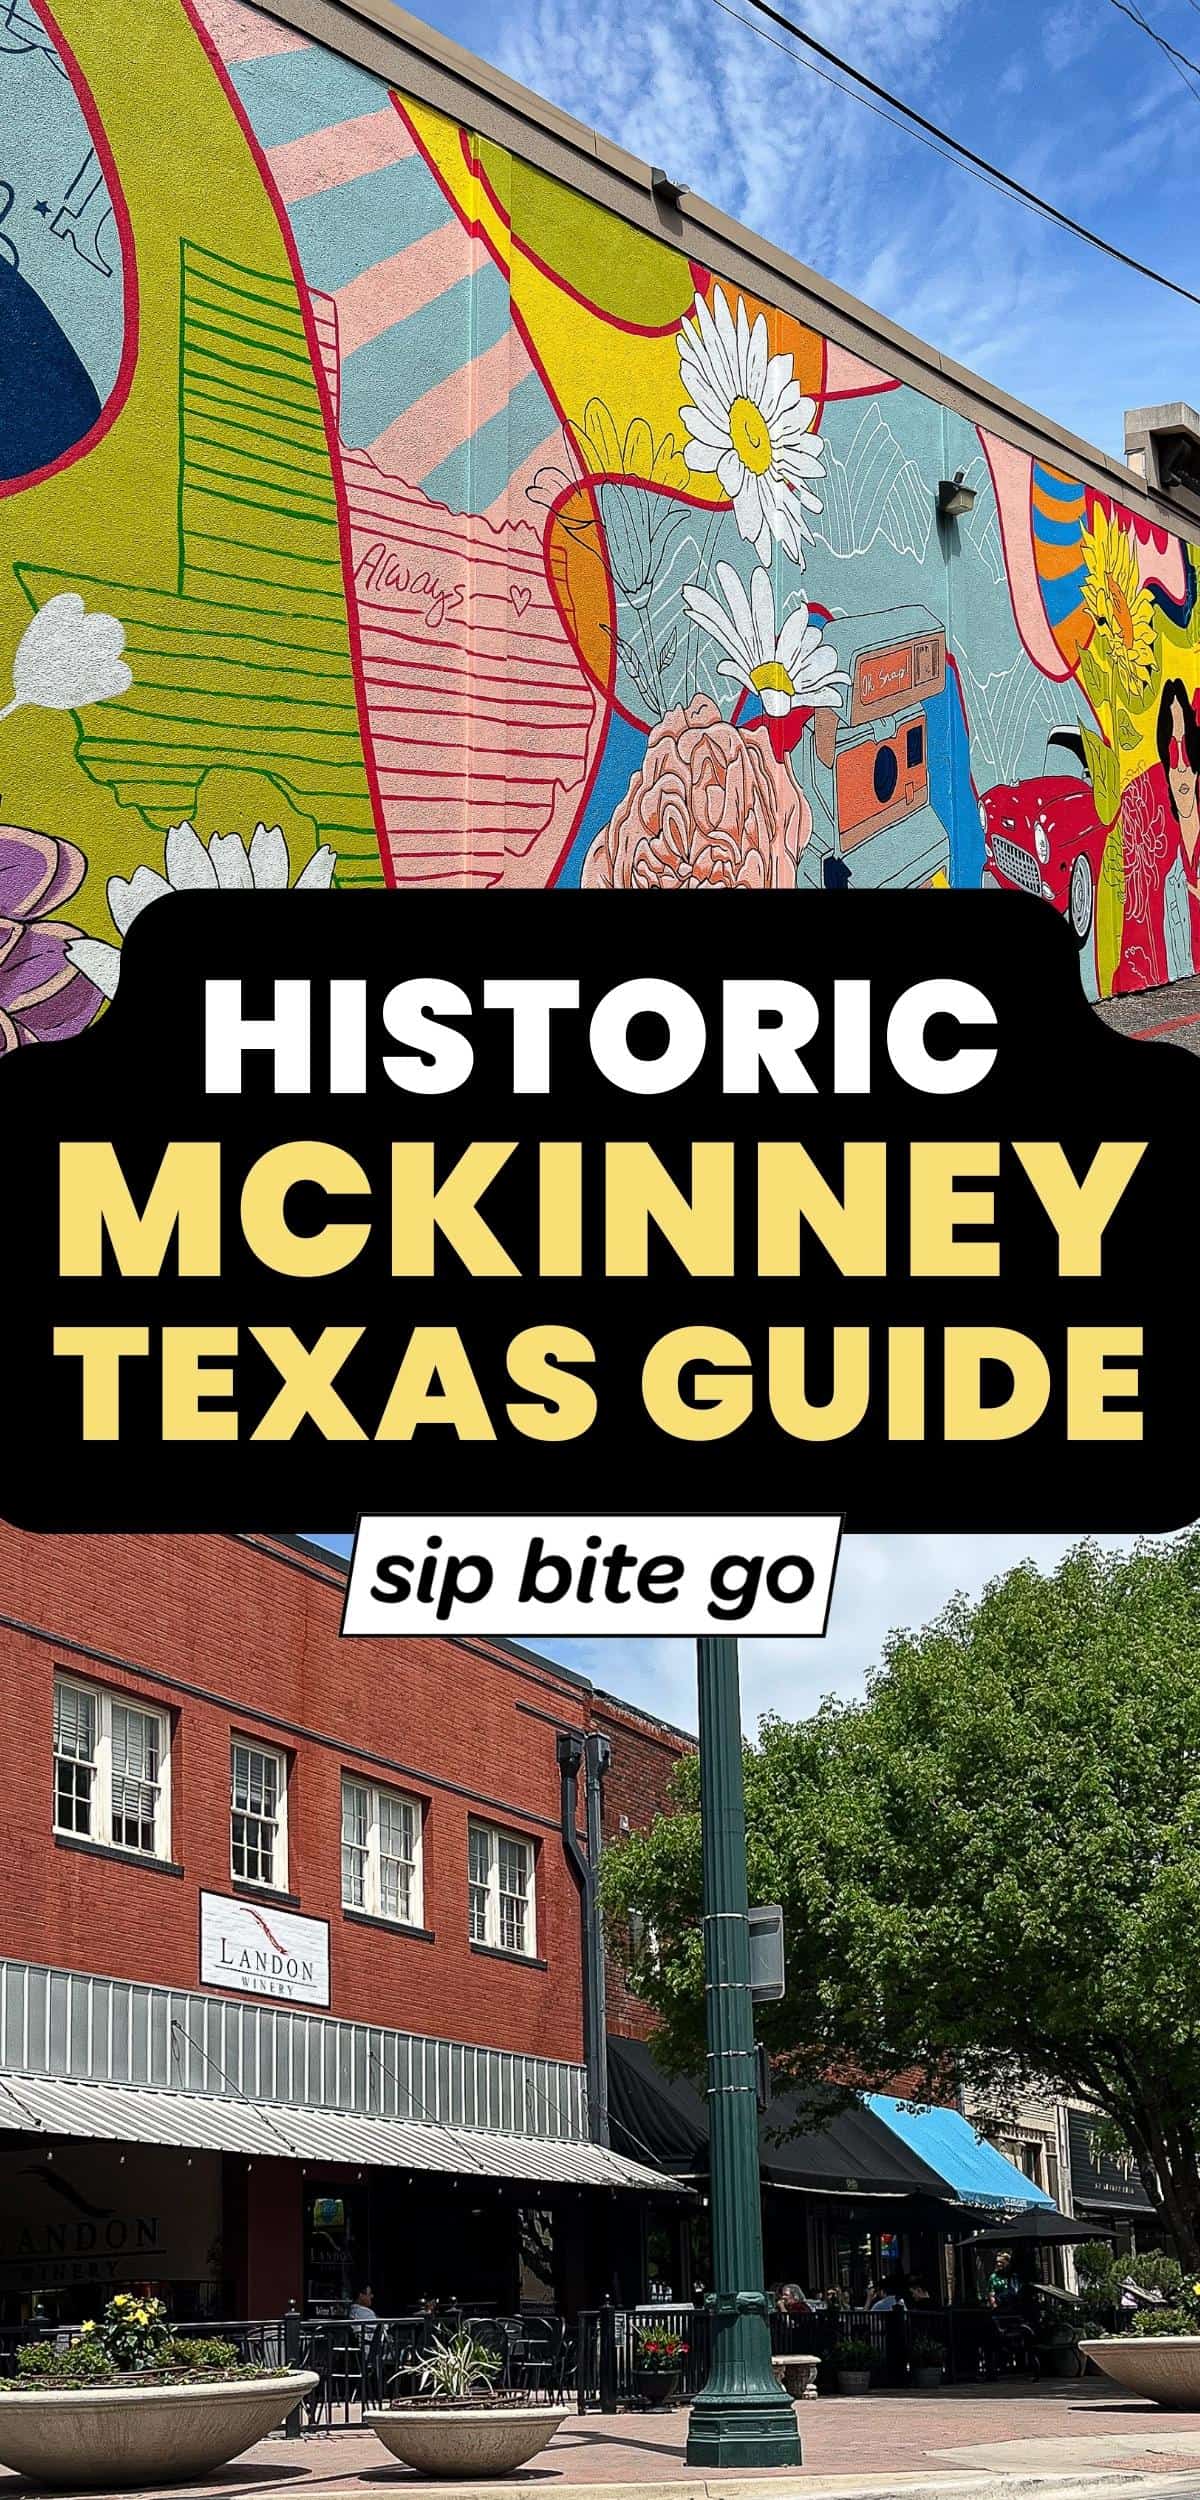 Historic Downtown McKinney Texas Visitor Guide Images with text overlay and Sip Bite Go logo